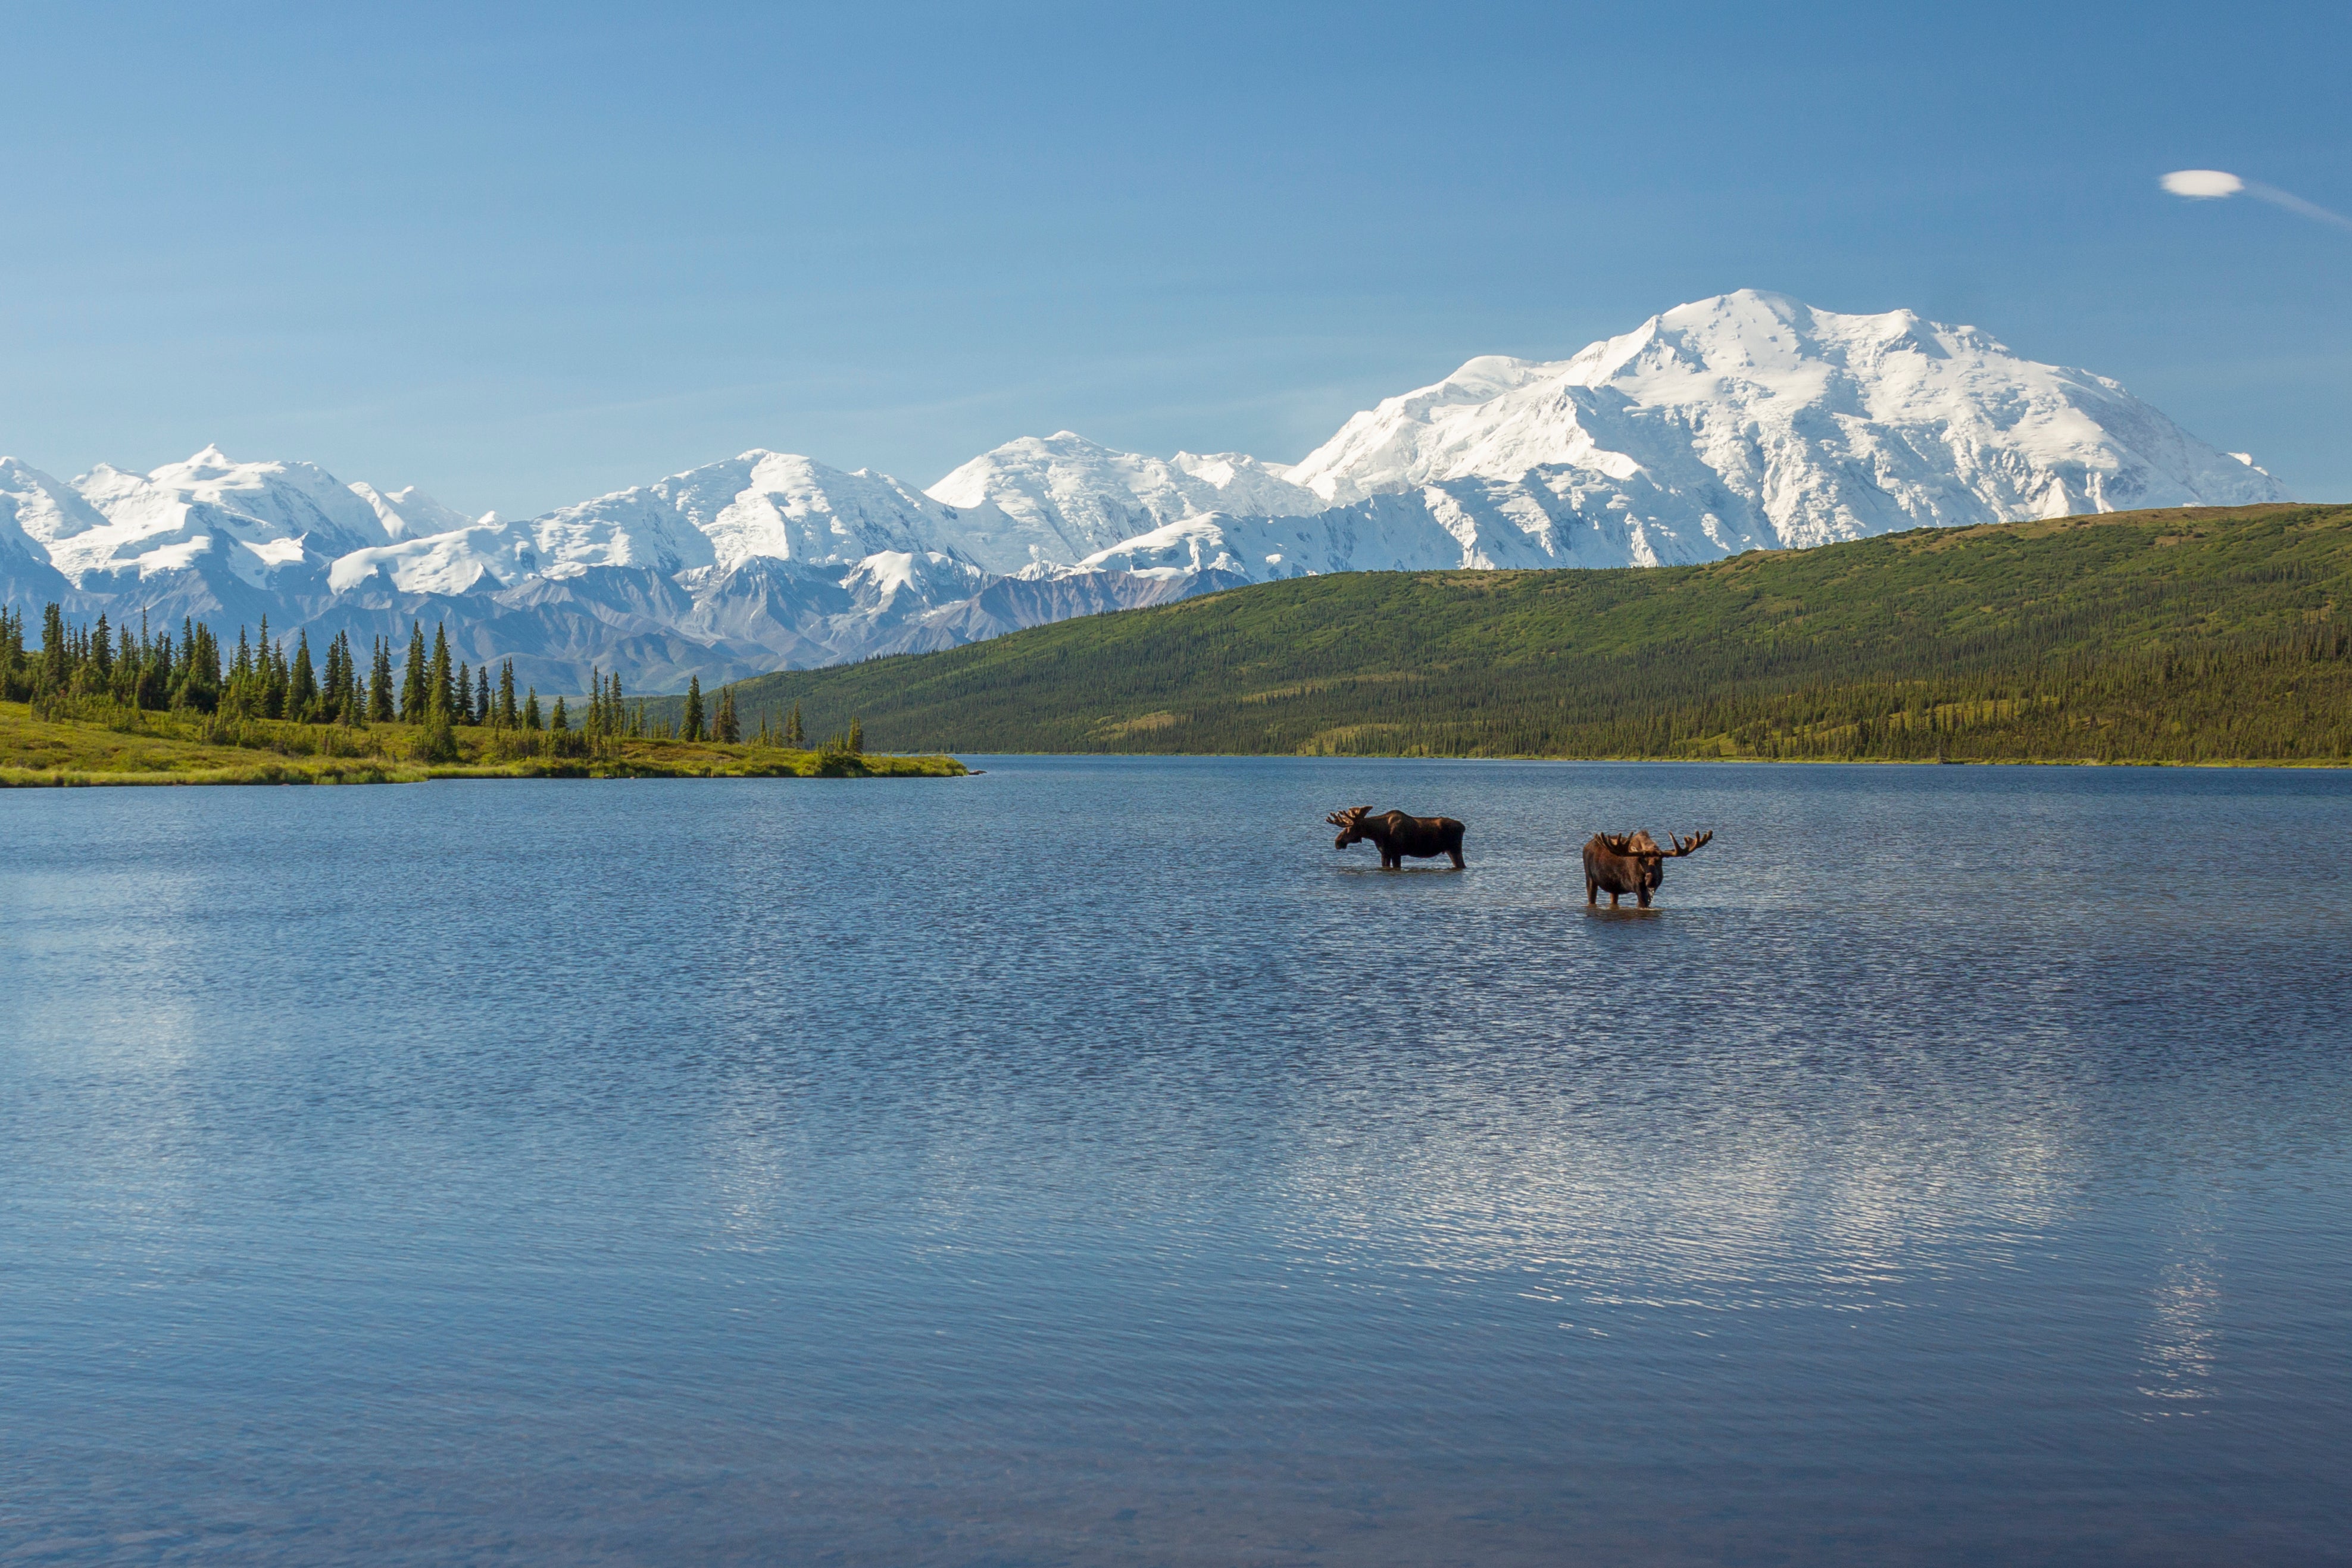 Denali National Park takes its name from its highest peak